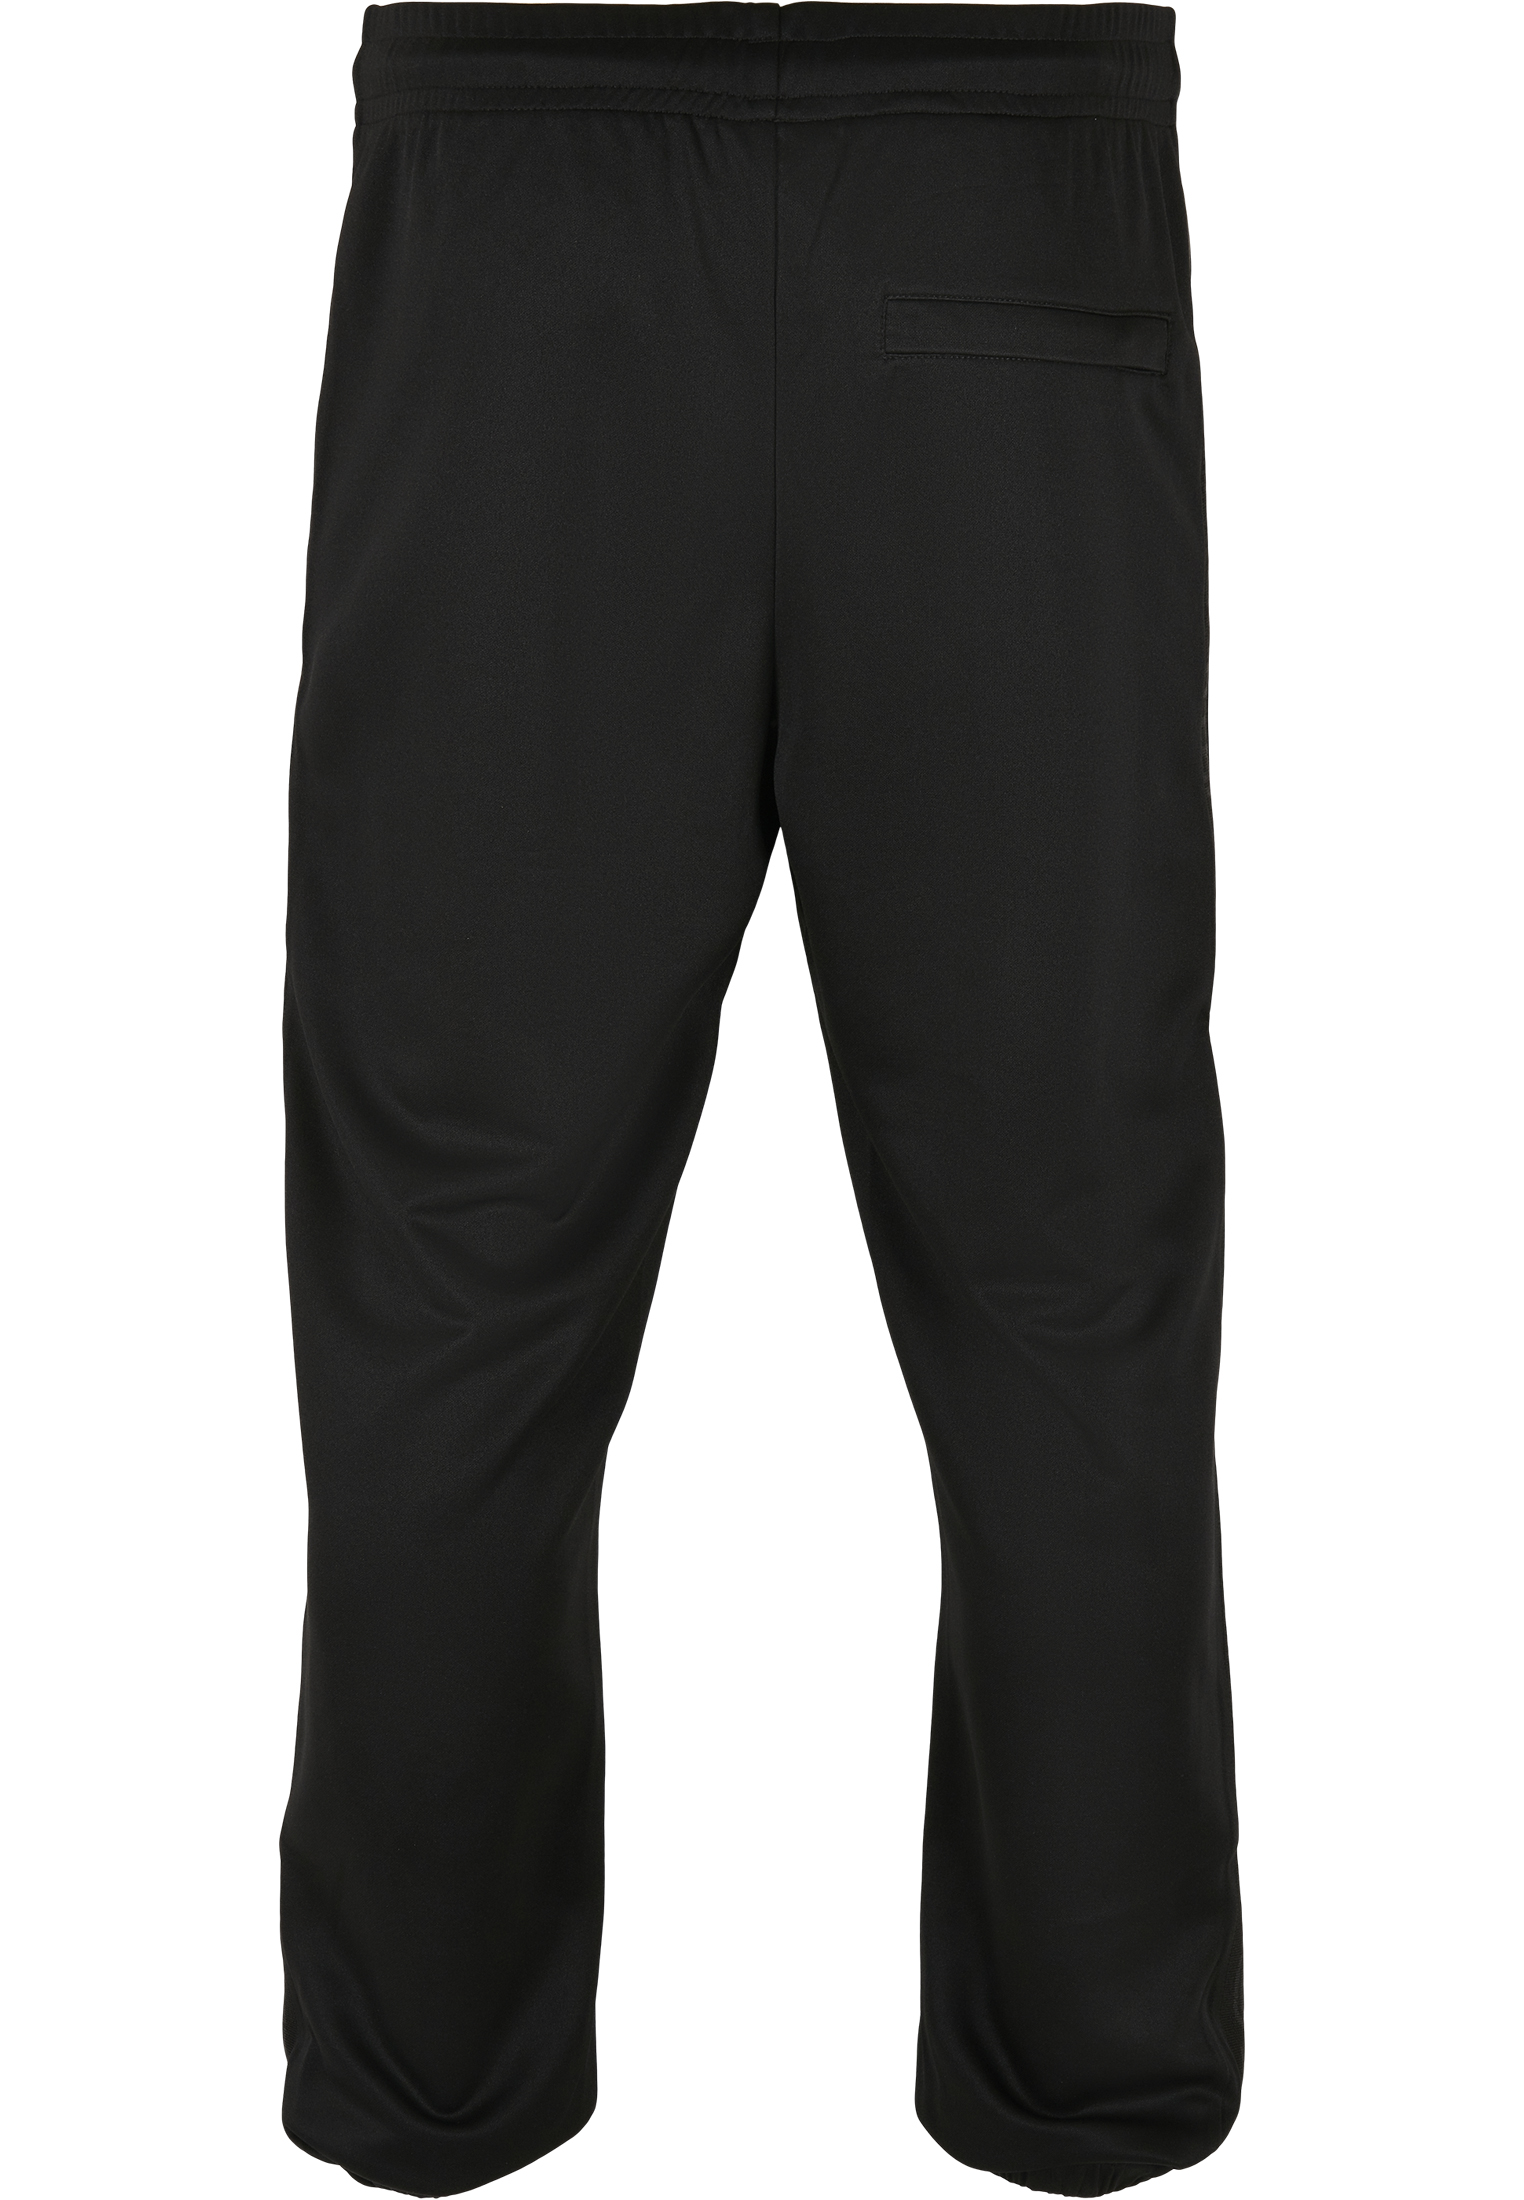 Saisonware Southpole Tricot Pants with Tape in Farbe black